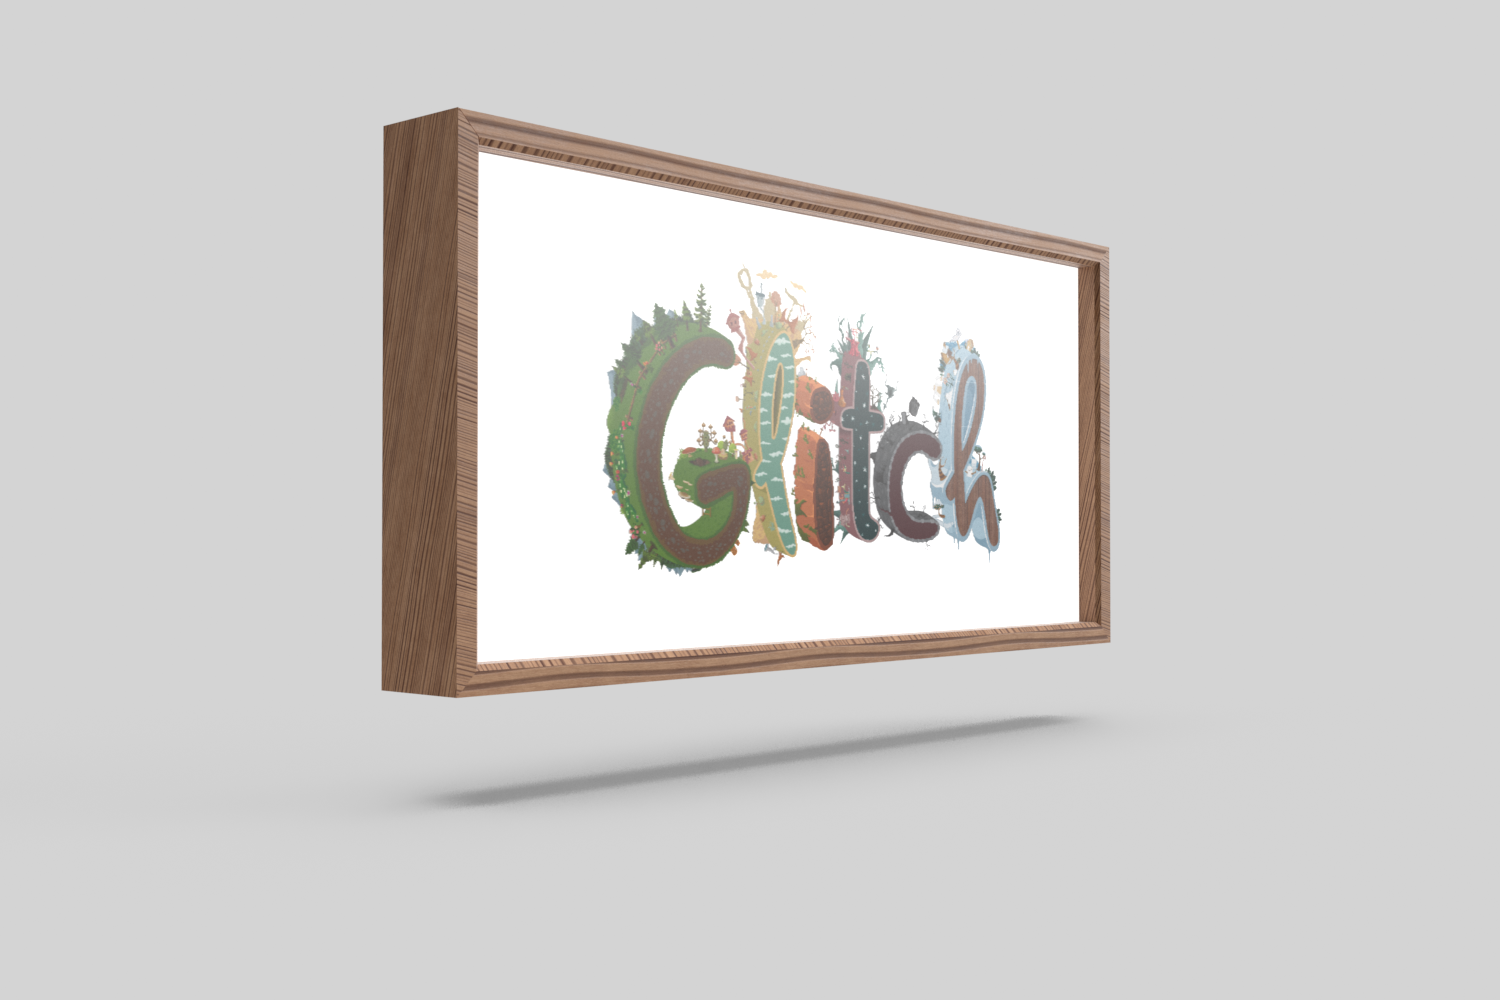 Backprinted full color lightbox sign with wood frame for Glitch, a browser-based, massively multiplayer online game—eventually becoming Slack.